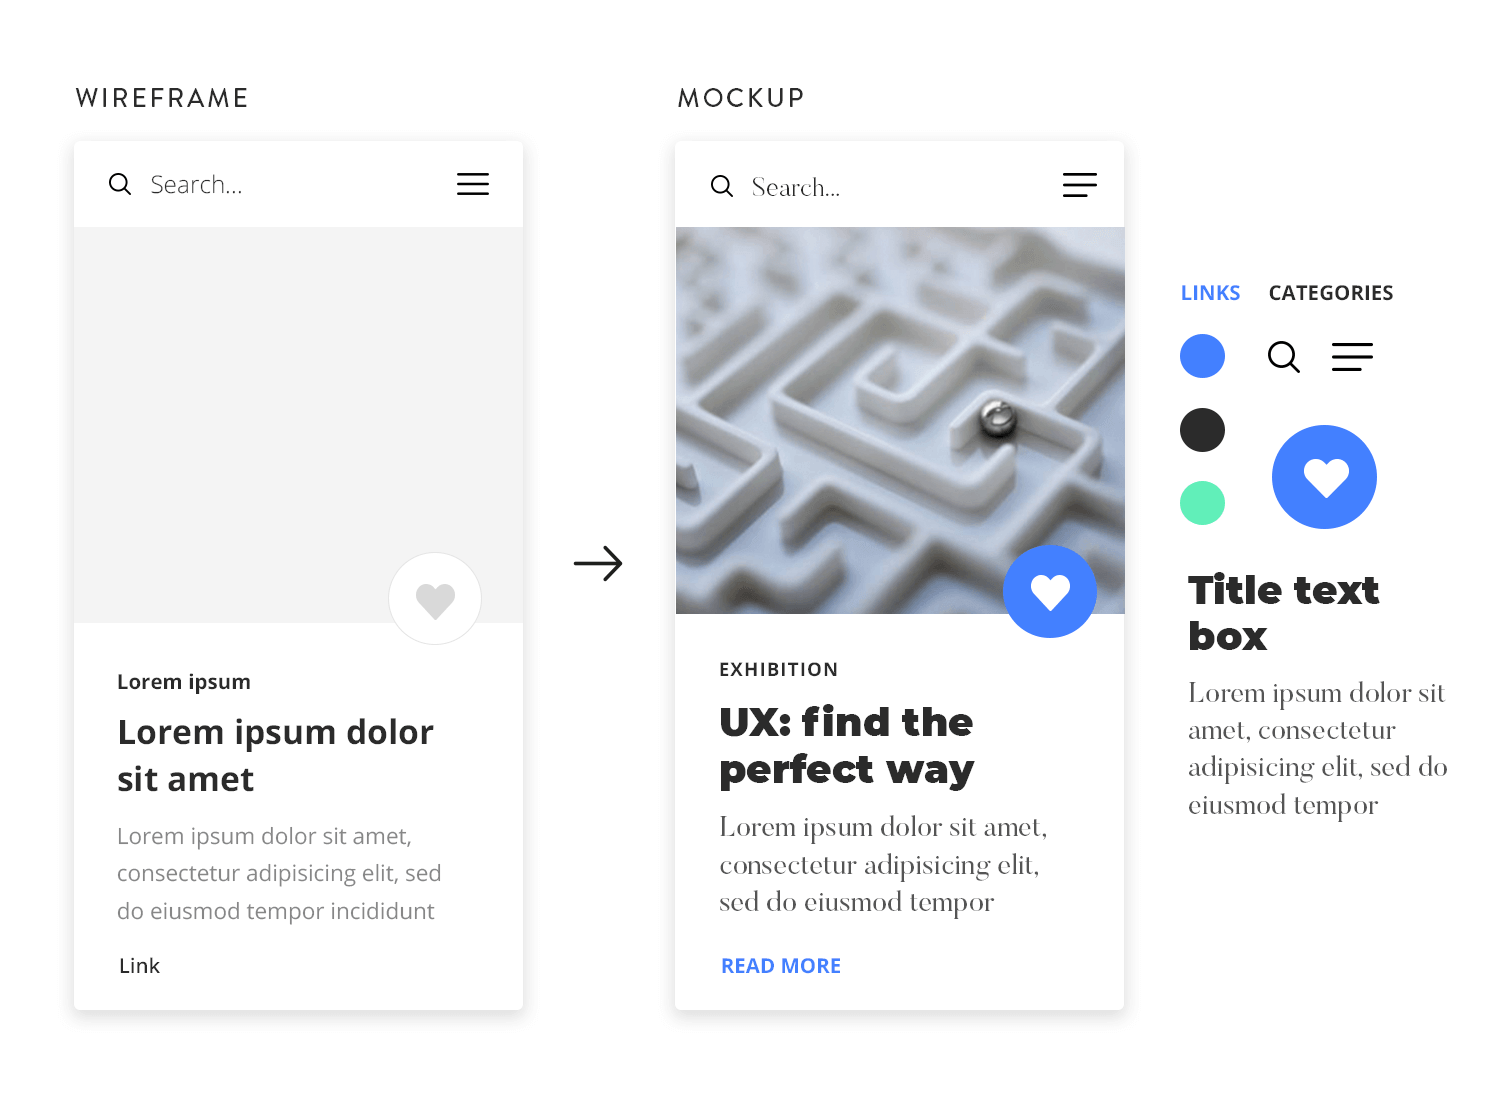 example of visual difference between mobile wireframe and mockup